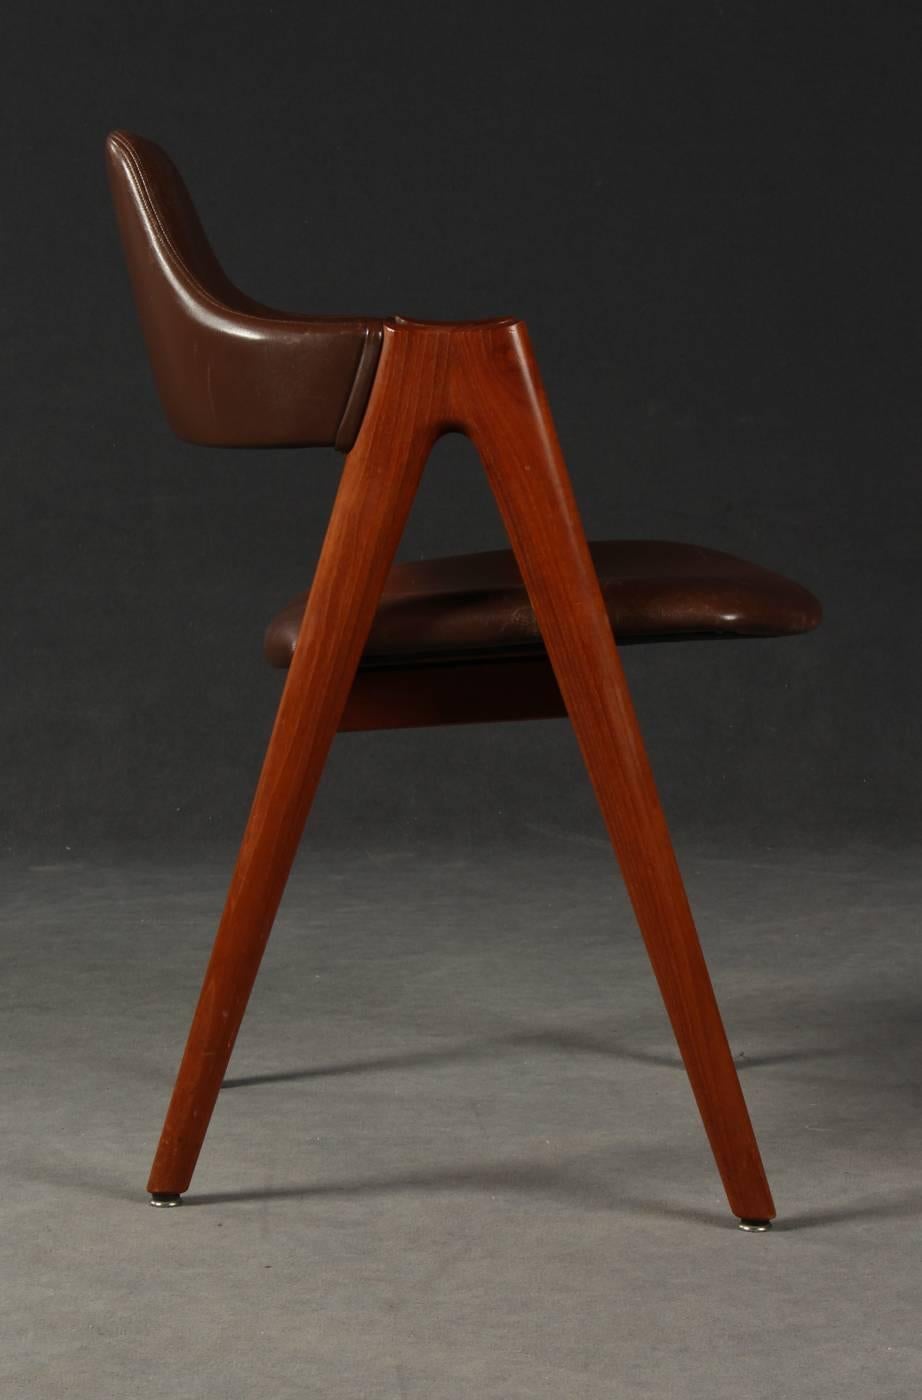 The Compass chairs are quite rare and were designed by Kai Kristiansen for SVA Møbler in 1958.
The Compass chair is a very comfortable chair that can easily stand alone in your house. The chair is in original but very good condition.

If you are